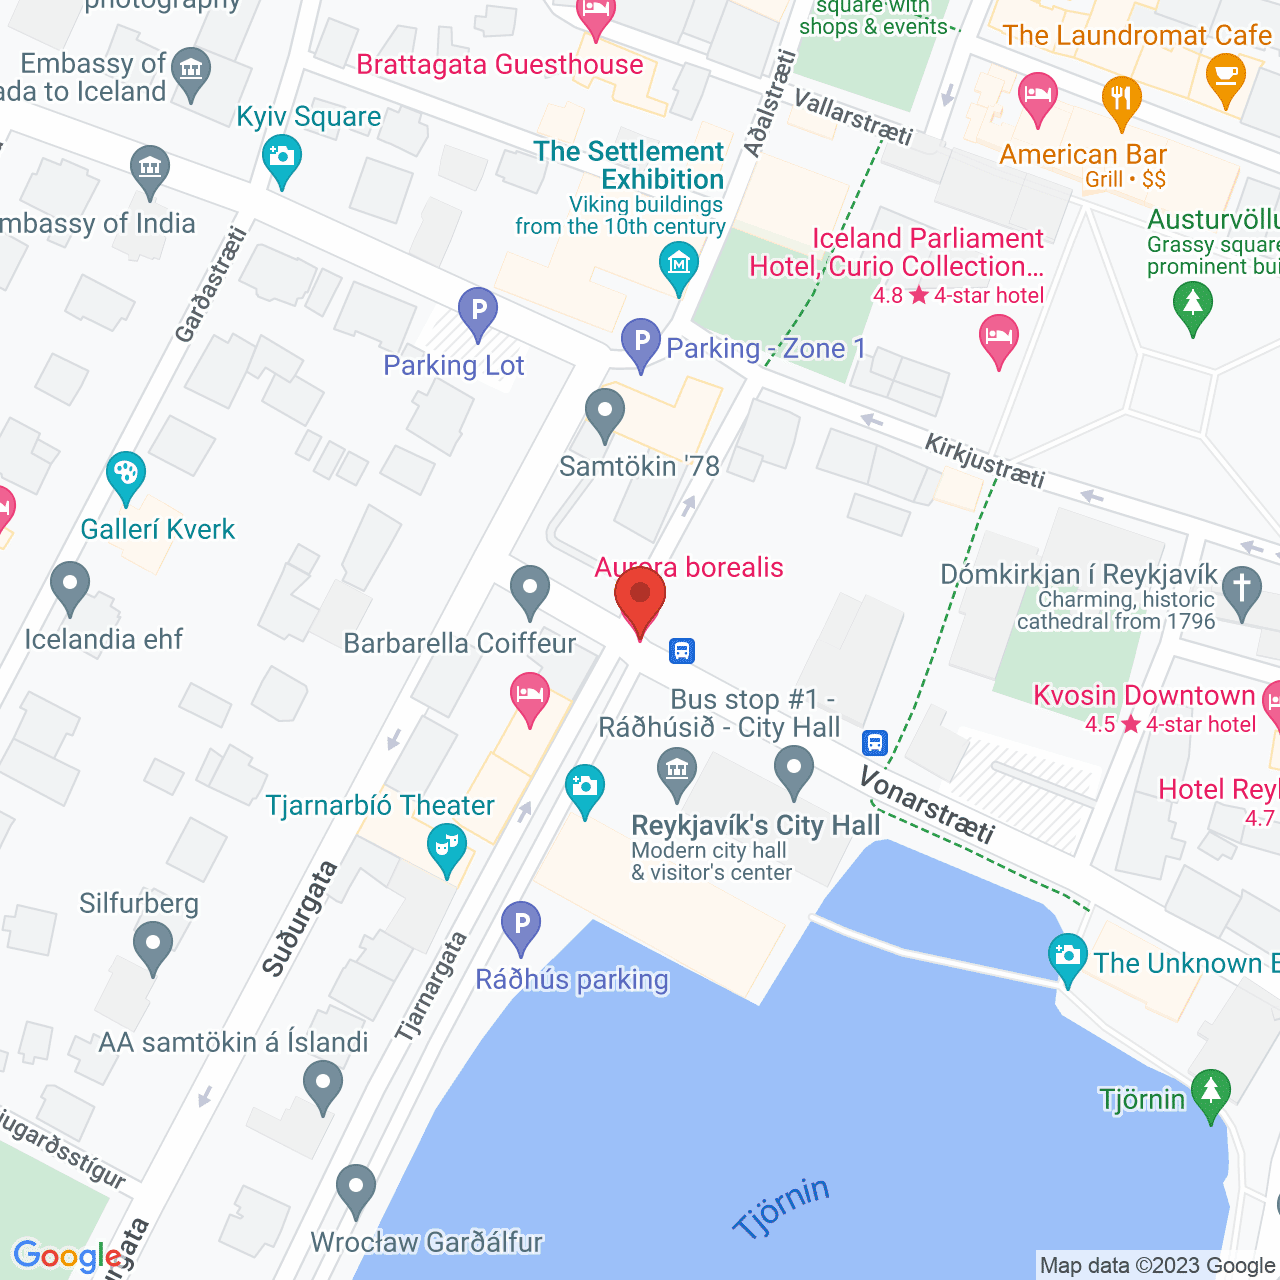 https://maps.googleapis.com/maps/api/staticmap?zoom=10&maptype=hybrid&scale=4&center=64.146582,-21.9426354&markers=color:red%7C%7C64.146582,-21.9426354&size=1000x1000&key=AIzaSyAQg6Liu52-a7wn17F9B-5c4QmJ9kTO3Mo